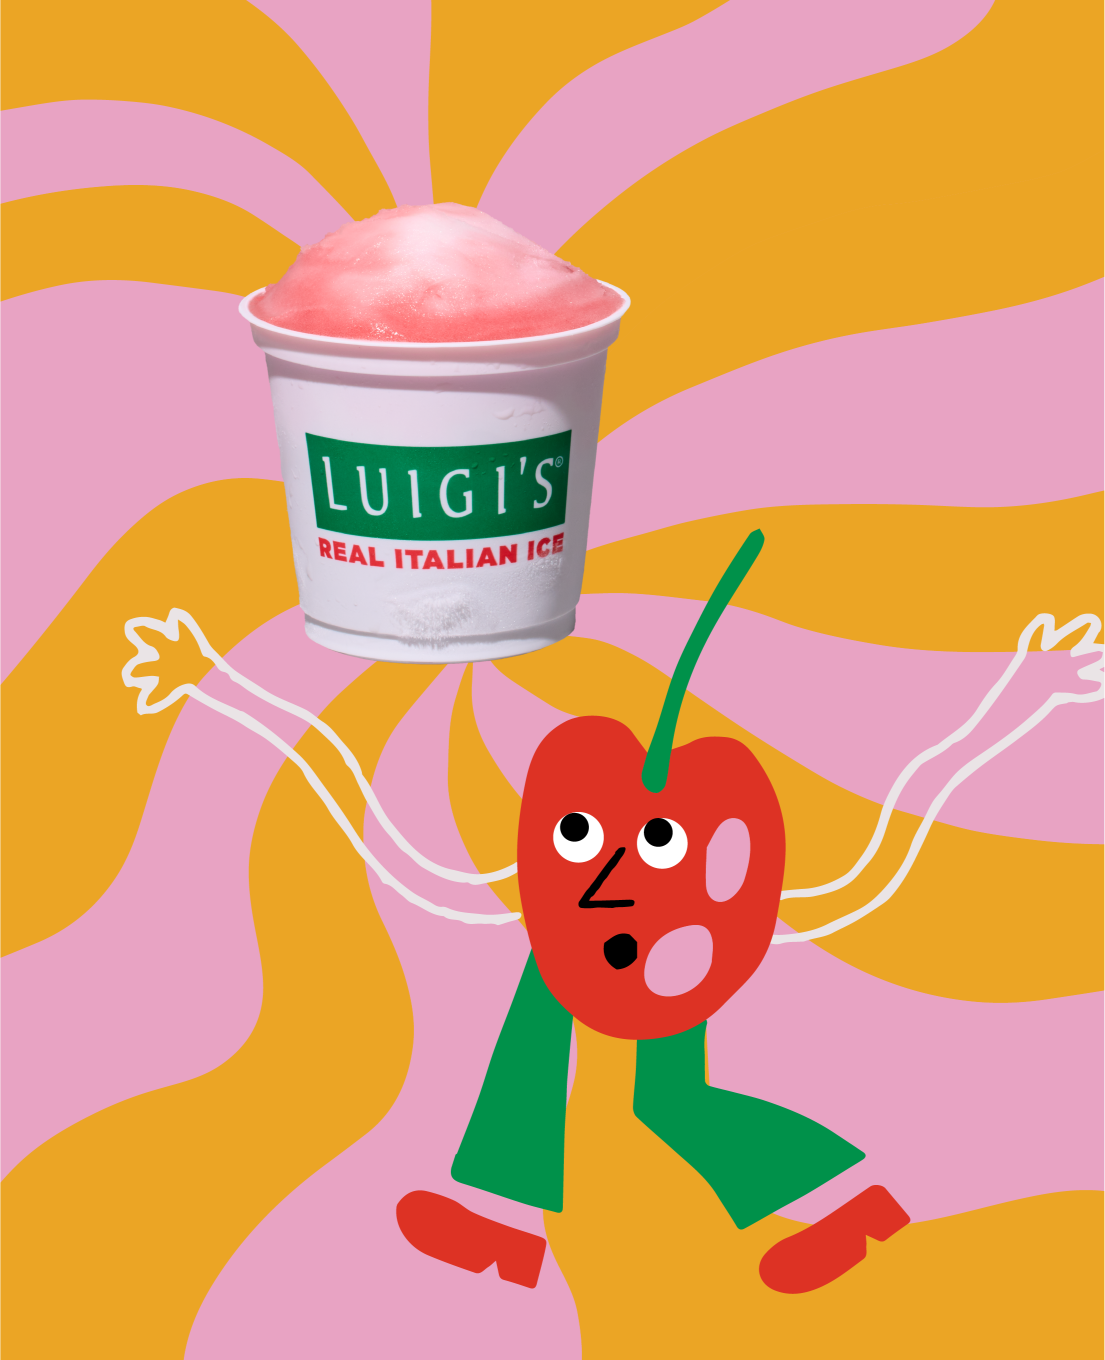 Groovy cherry graphic with cherry swirl LUIGI'S Real Italian Ice. Cool retro, psychedelic background in pink and yellow. Cherry graphic is looking up at the cup of Italian ice with a surprised face. The cherry character is wearing green pants, and red shoes.